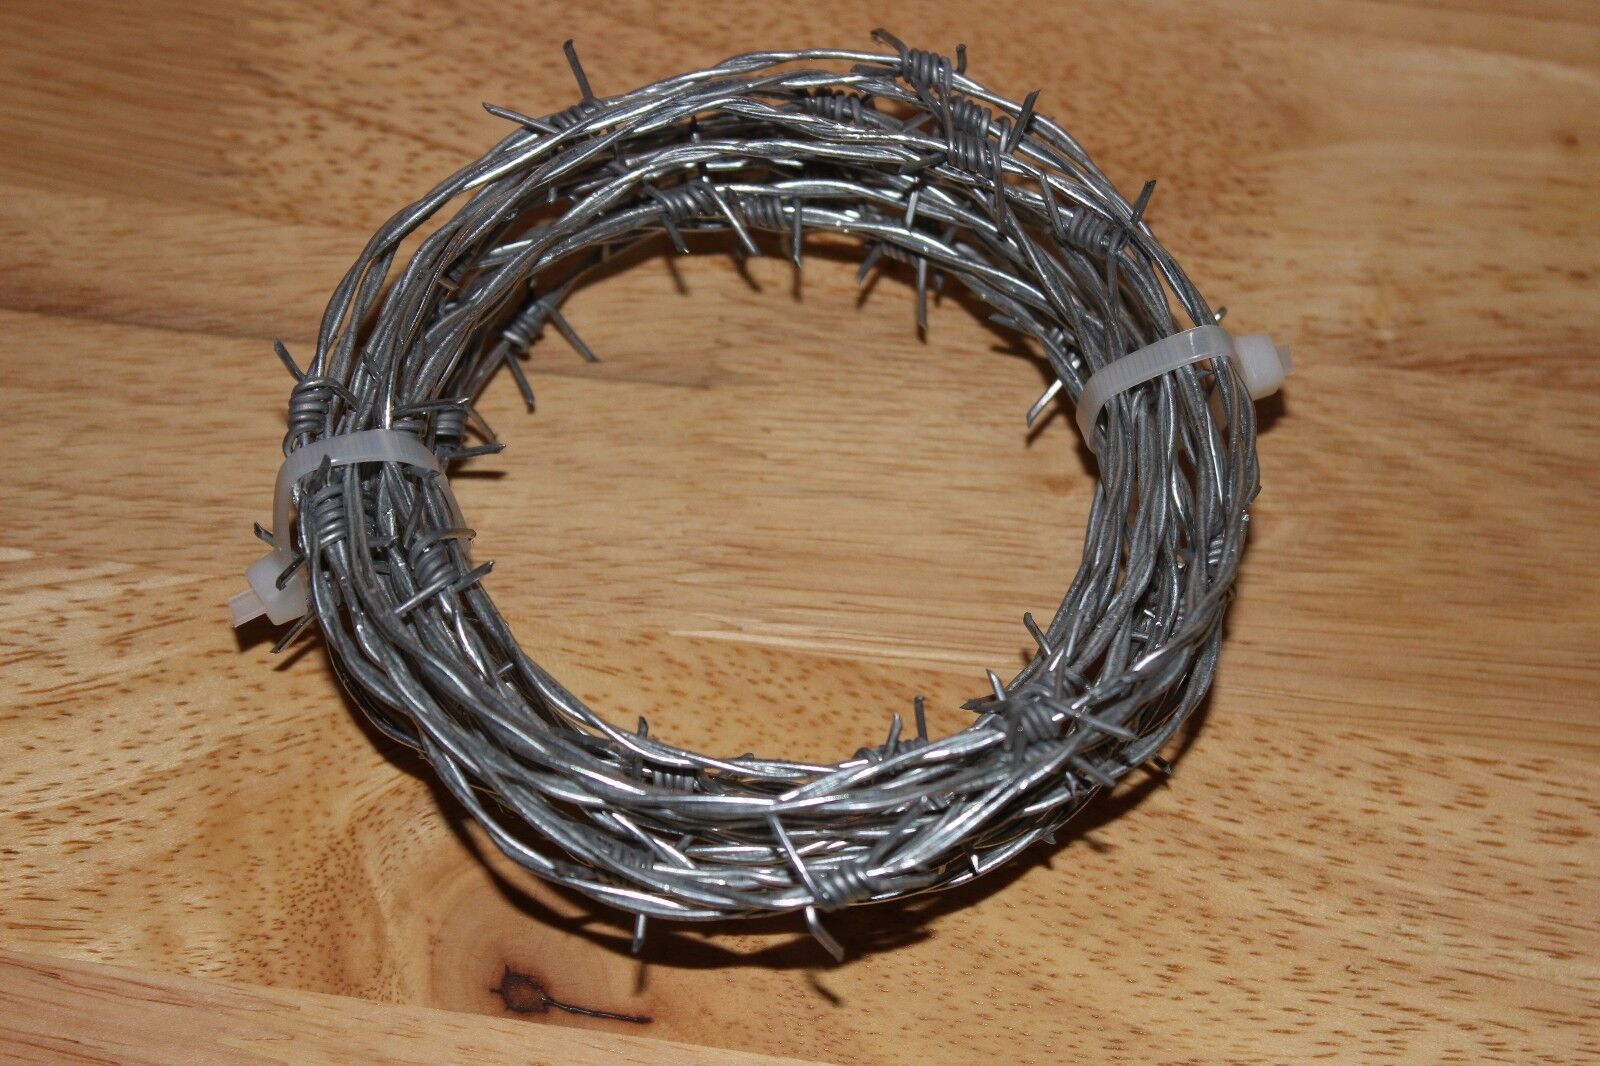 10 FEET BARB WIRE, BARBED WIRE NEW BEKAERT 18 GAUGE 4 POINT CRAFTS *MADE IN USA*